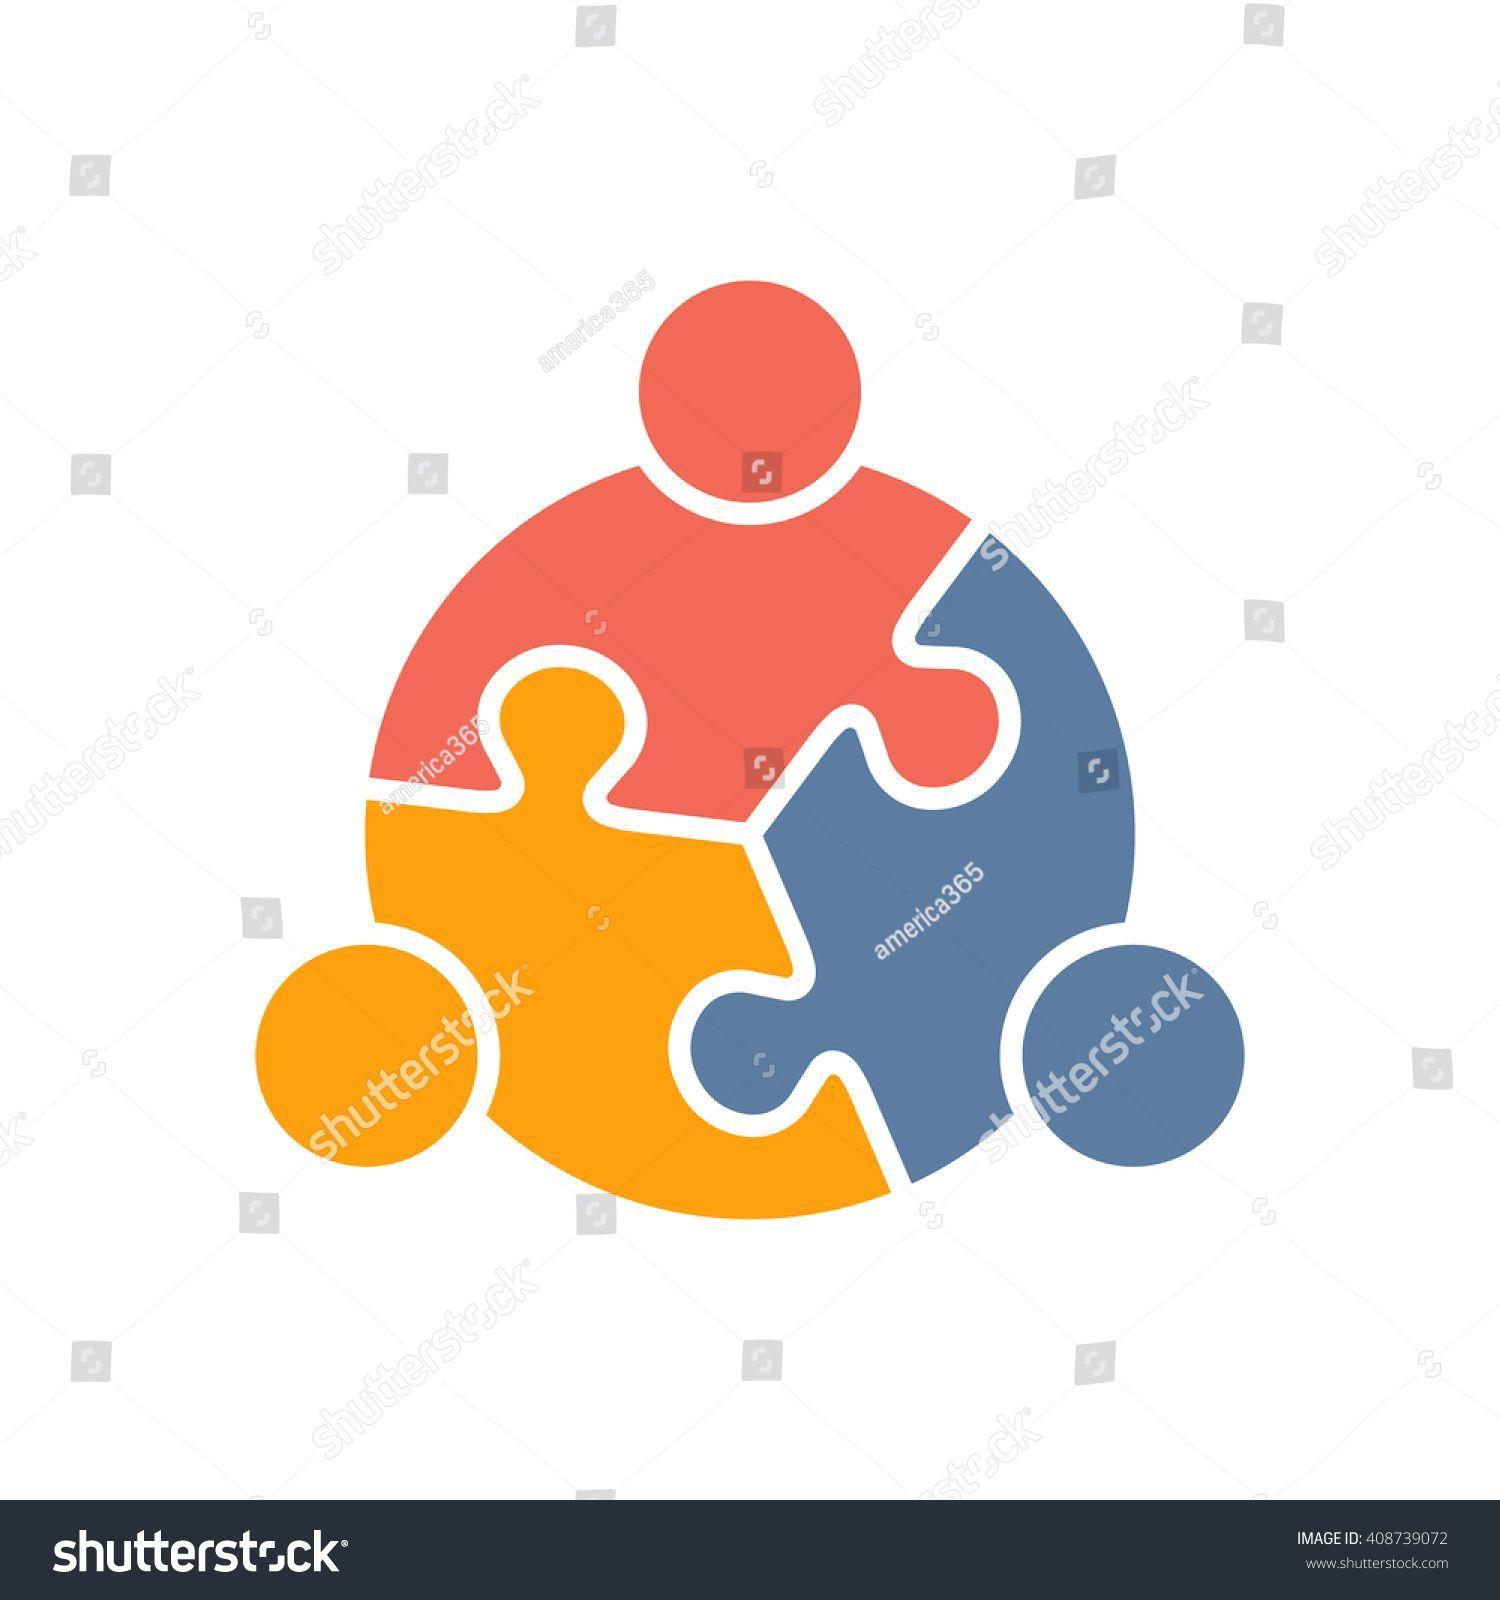 Three- Person Logo - Teamwork People puzzle three pieces #people #social #internet